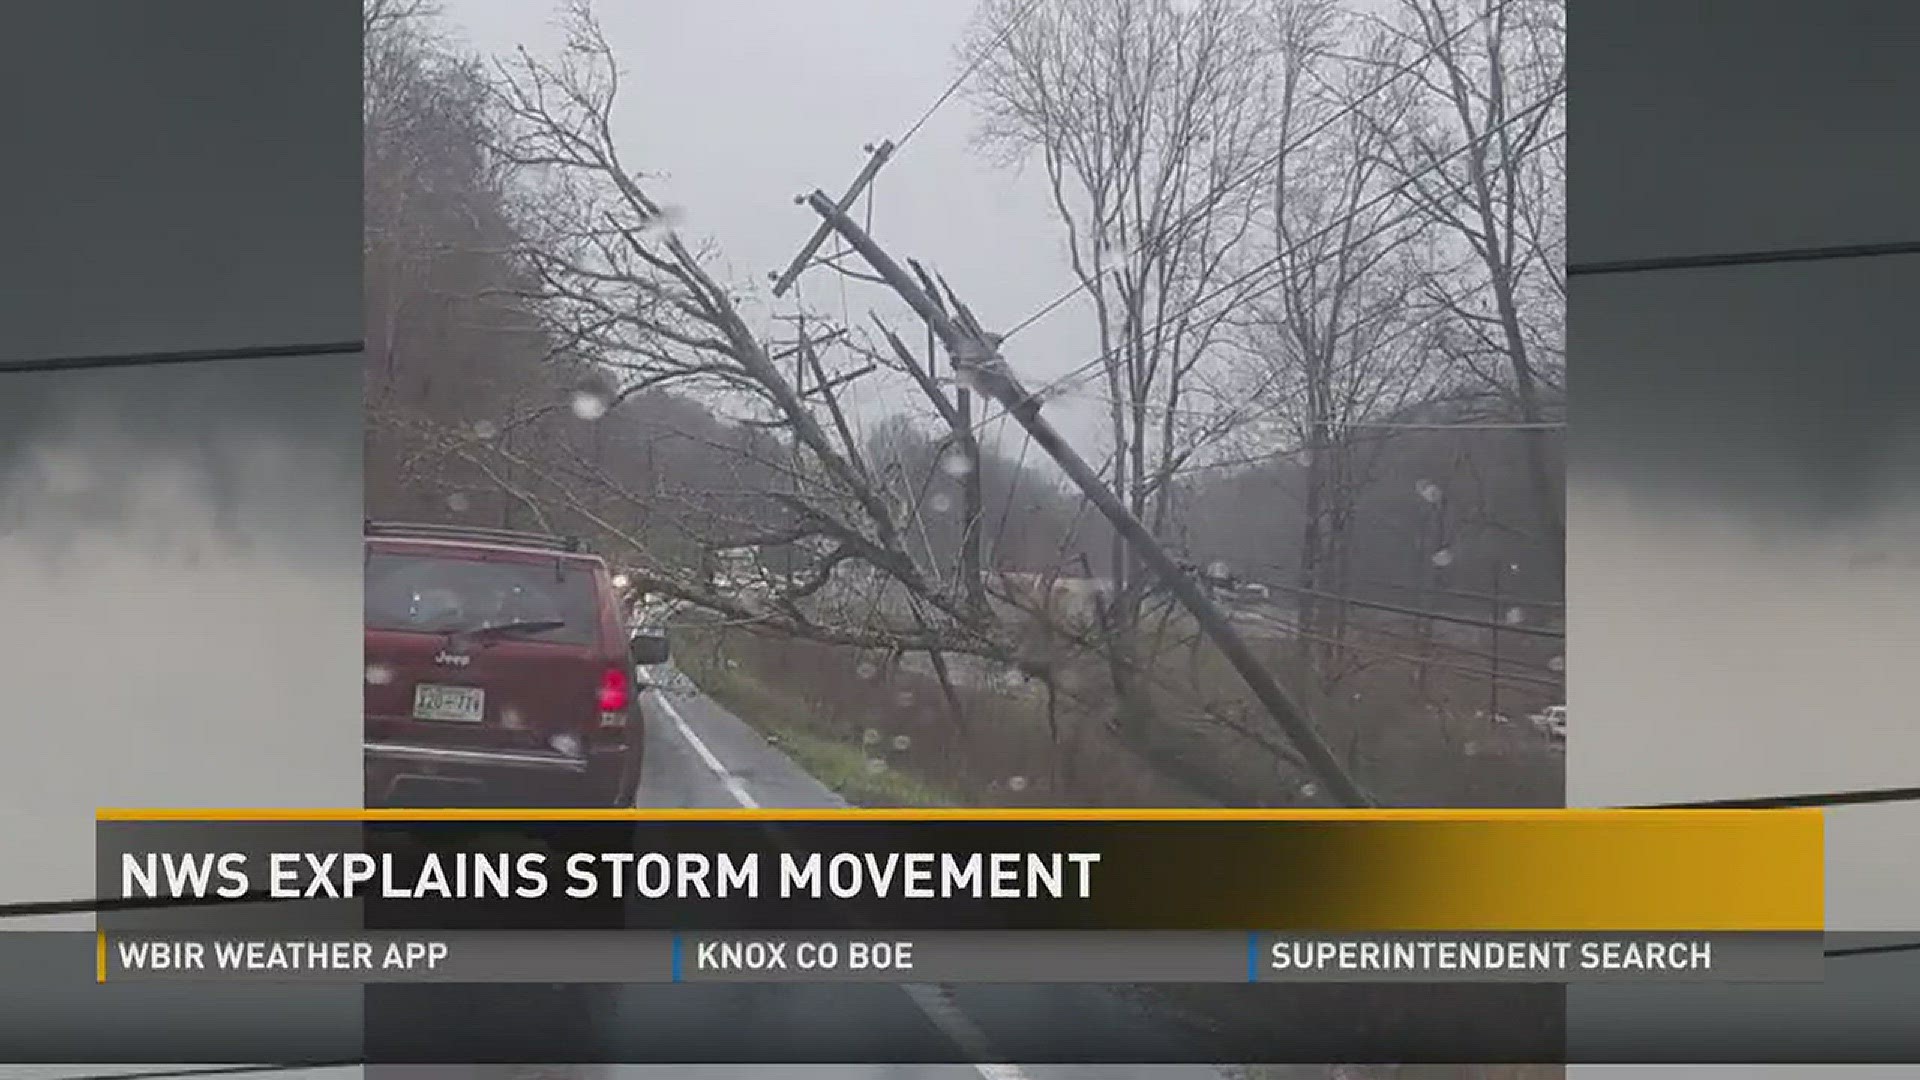 March 1, 2017: The National Weather Service in Morristown explains more about the severe storm system that moved through East Tennessee.